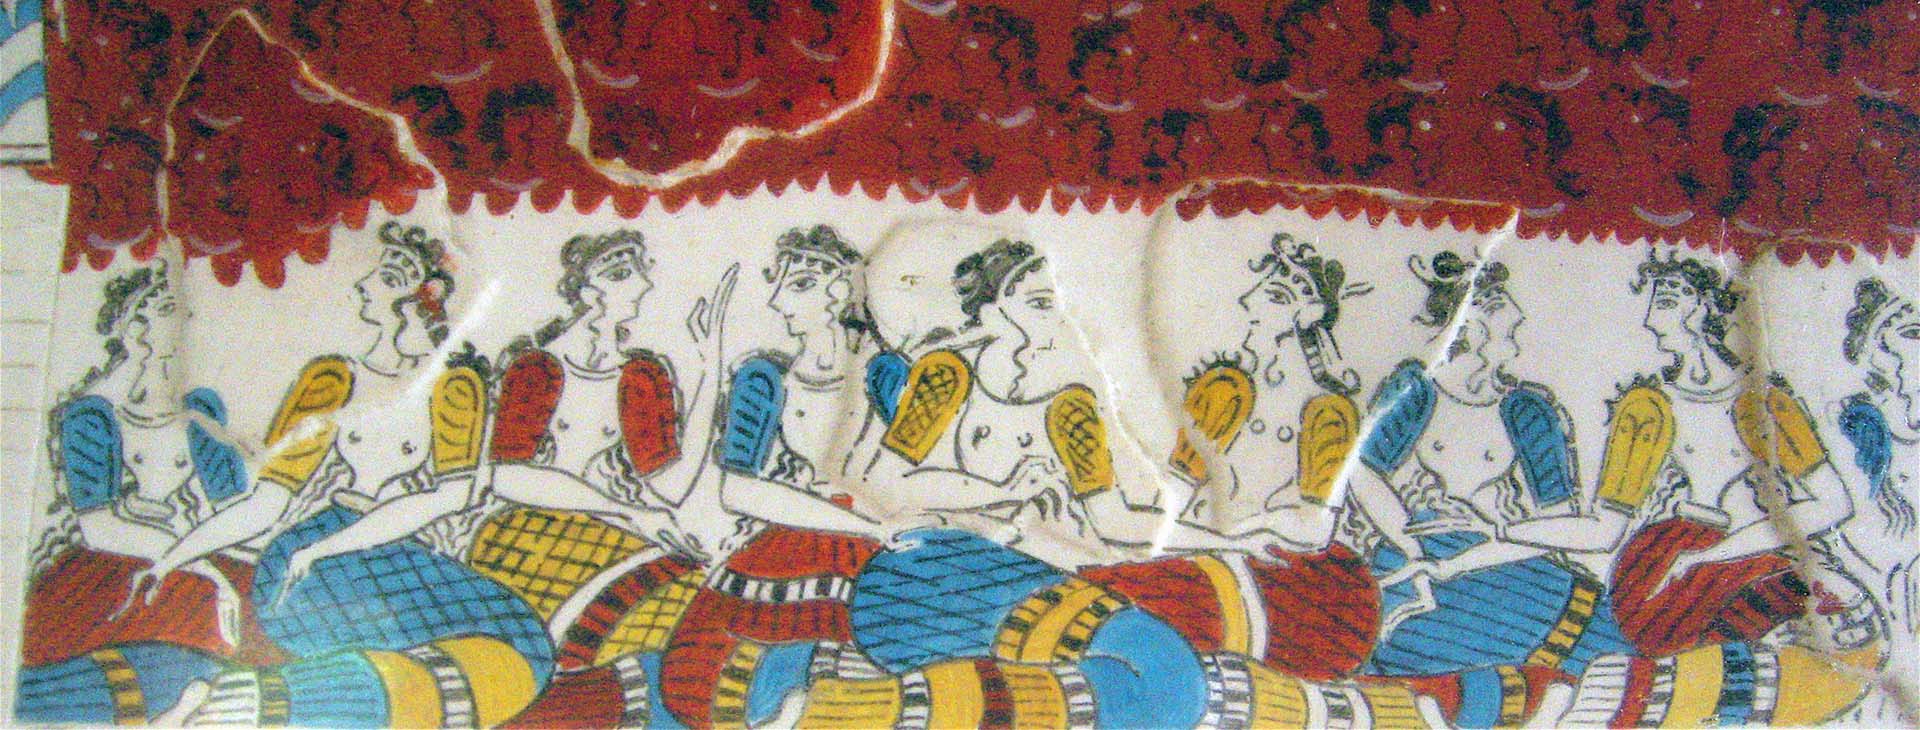 The ladies of the court, fresco at the Minoan palace of Knossos, Heraklion